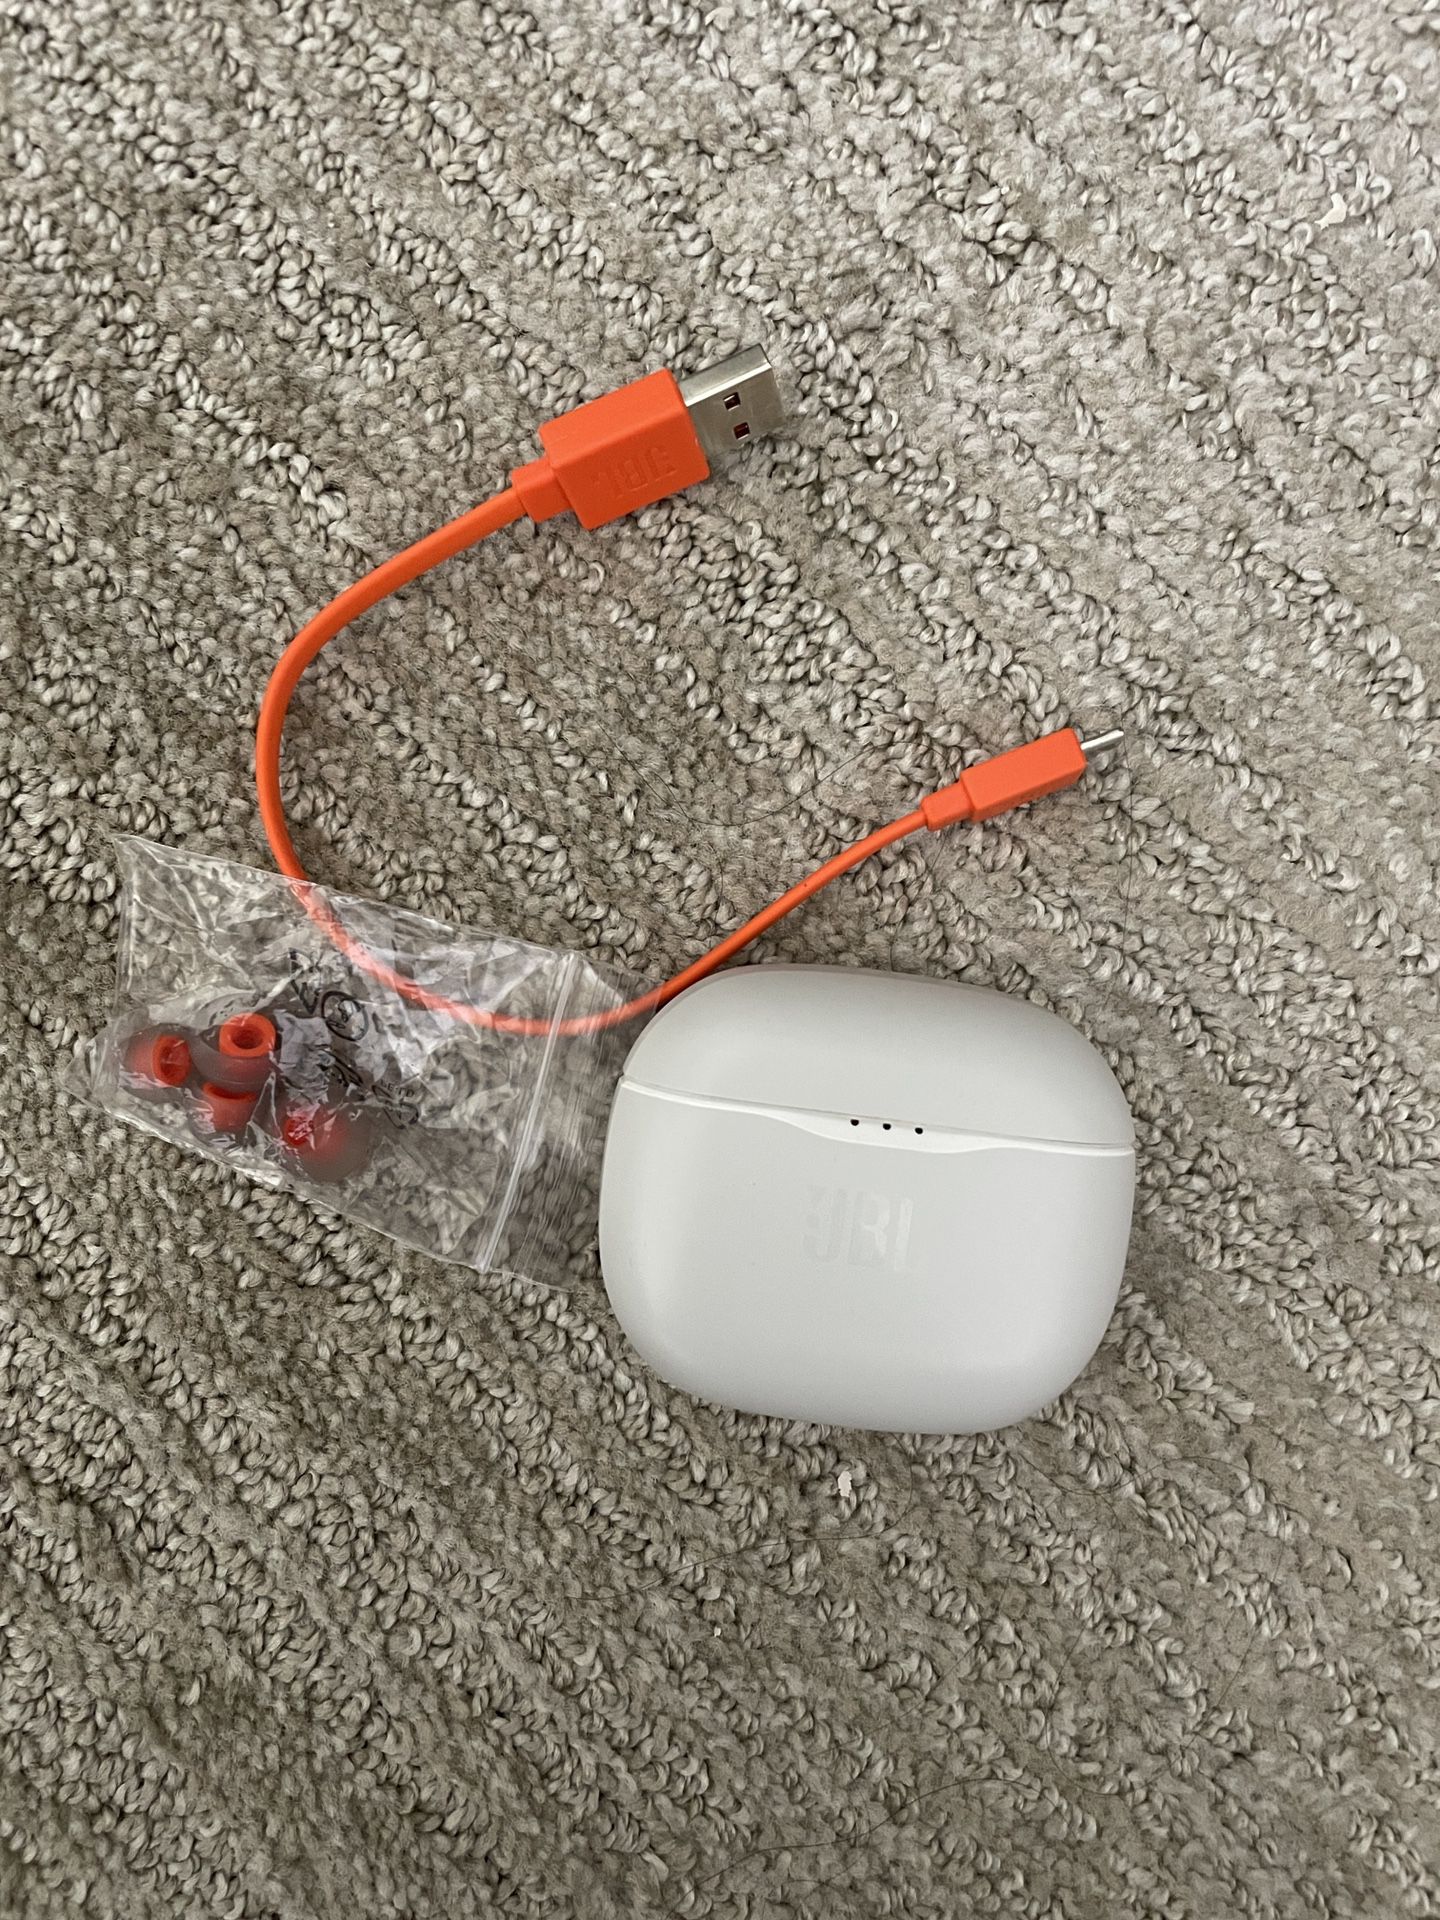 JBL Wireless Earbuds With Accessories 